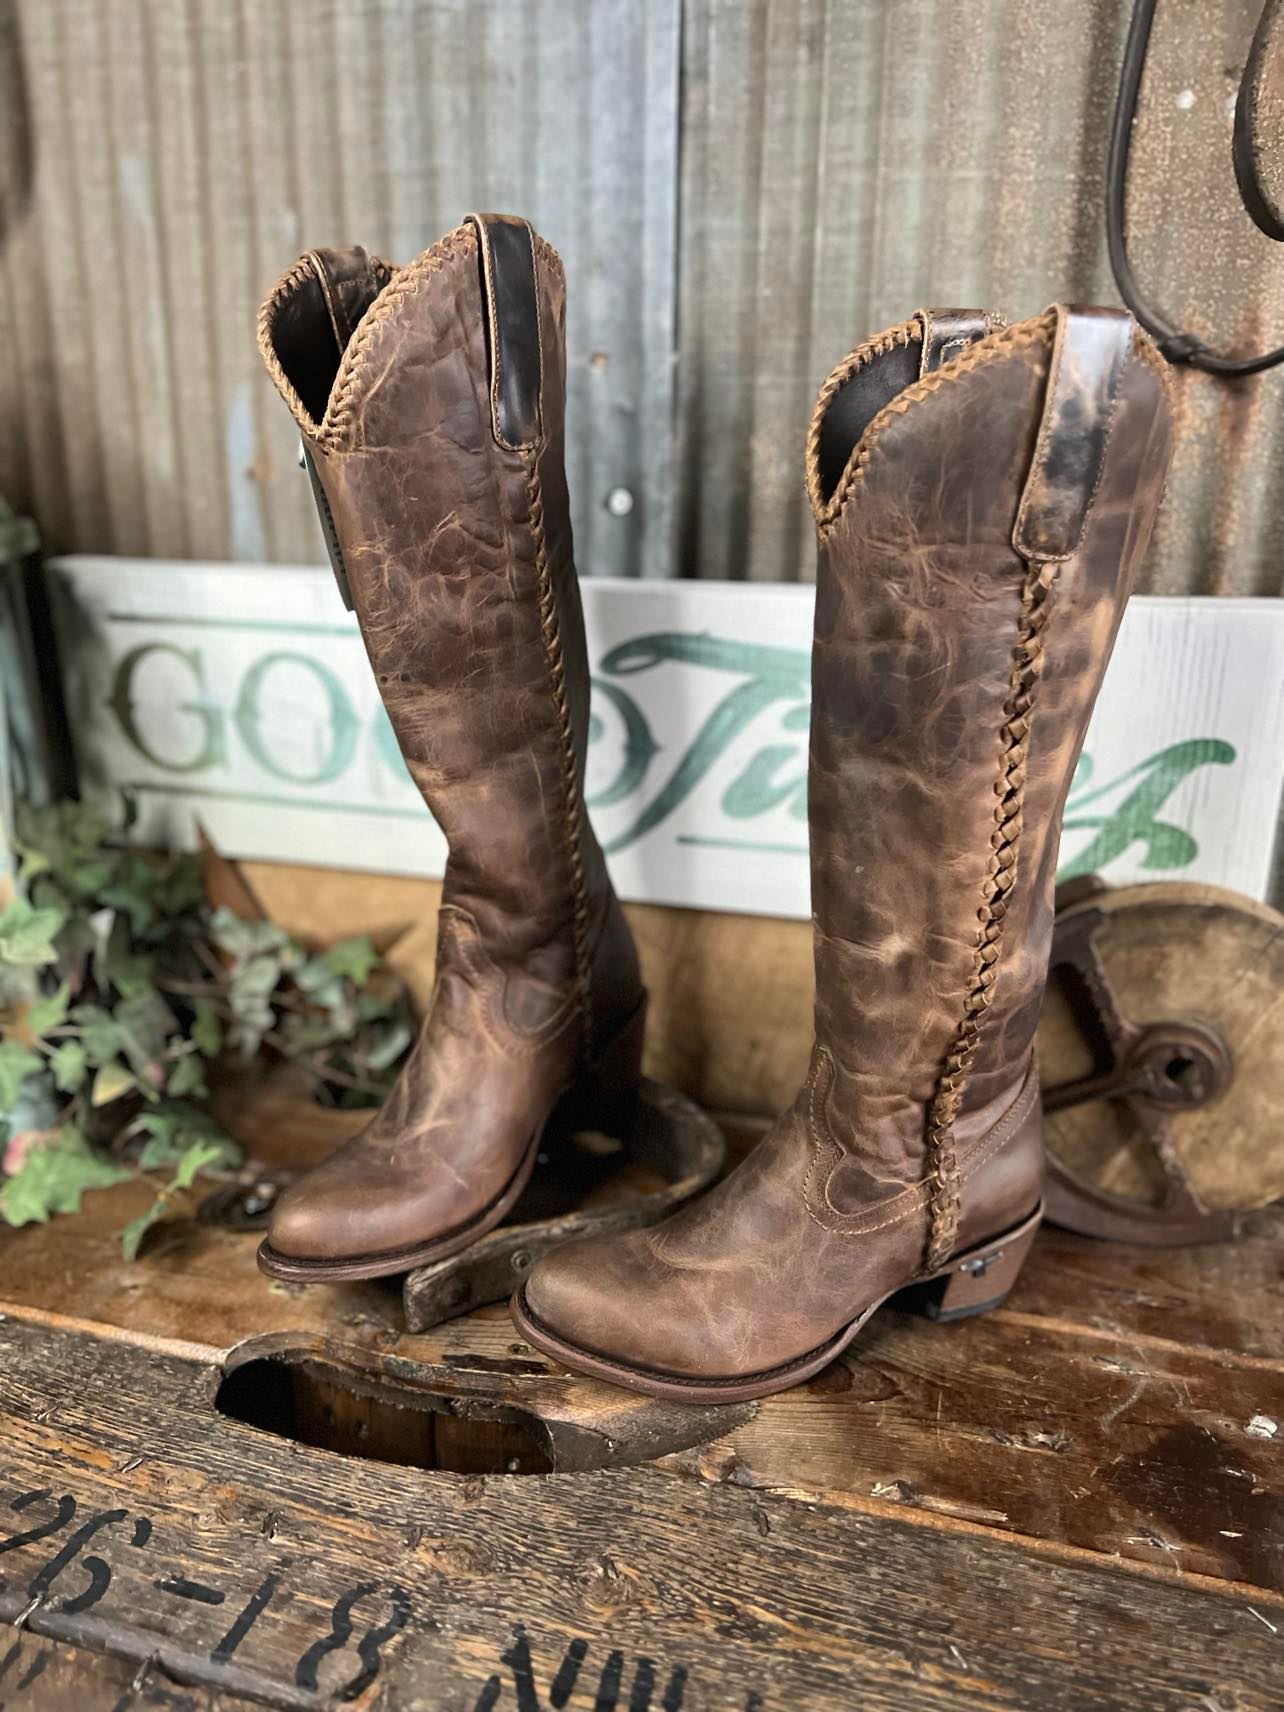 Lane Boots Plain Jane Brown Boots-Women's Boots-Lane Boots-Lucky J Boots & More, Women's, Men's, & Kids Western Store Located in Carthage, MO